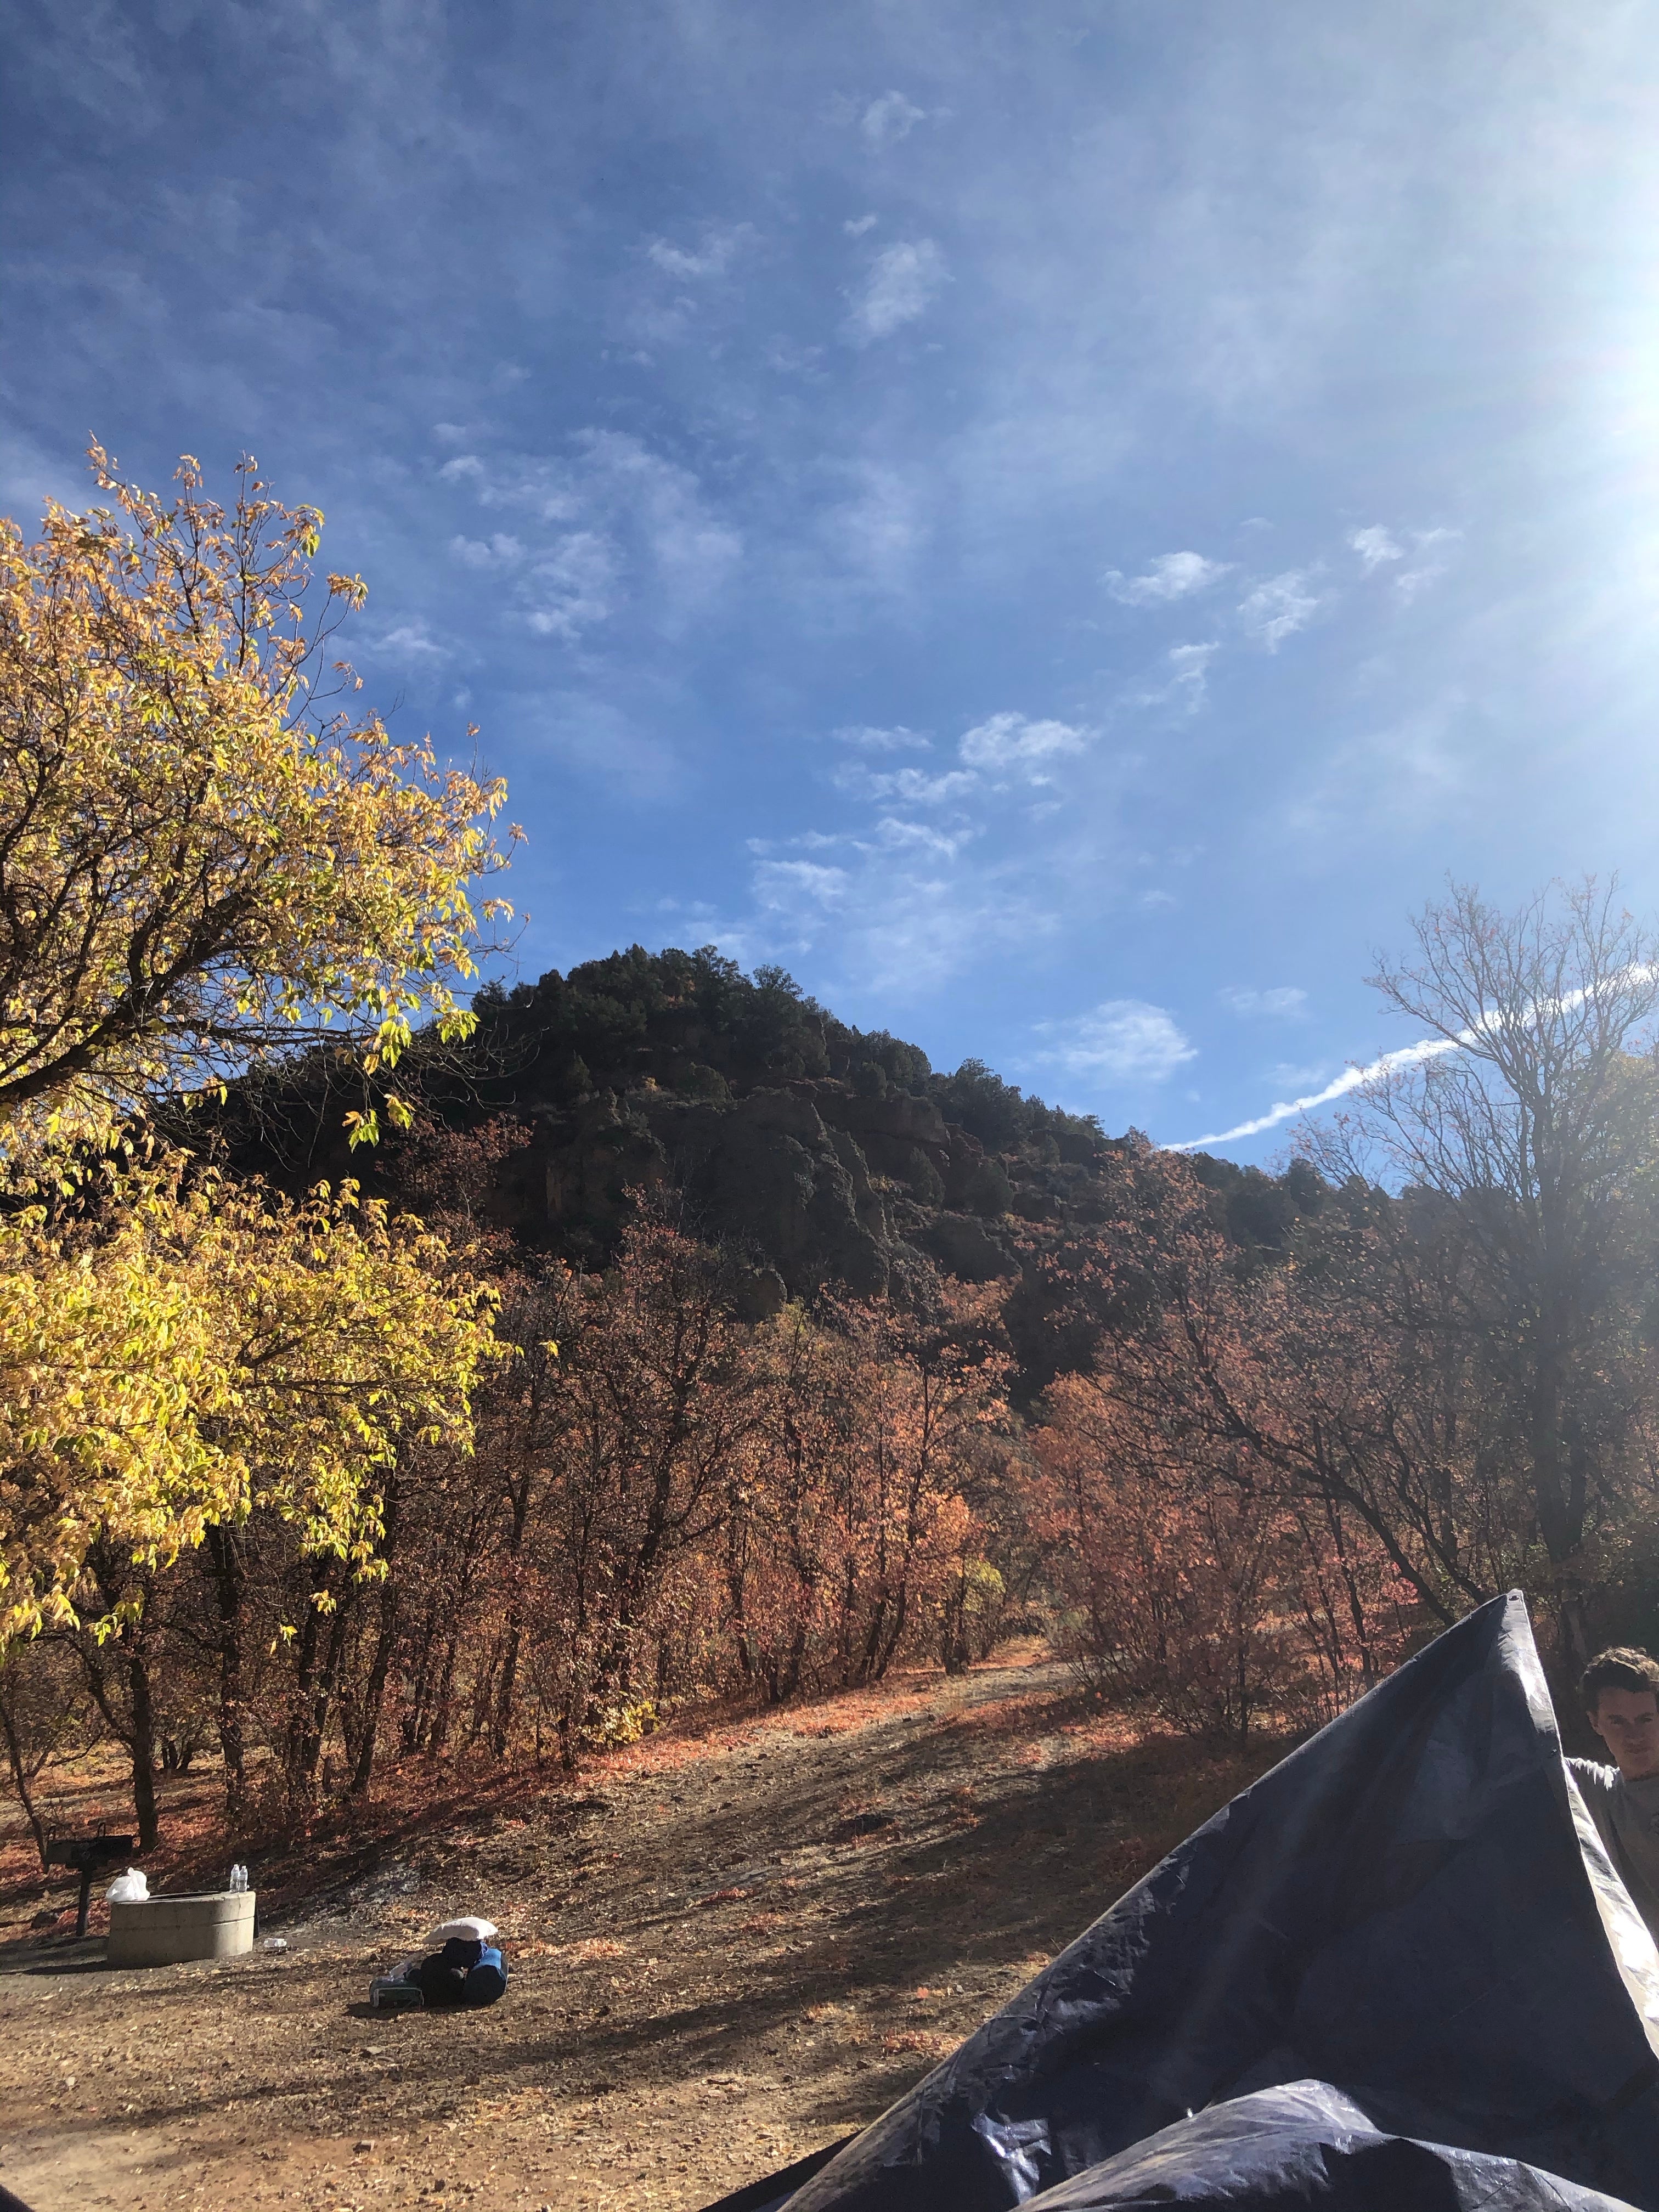 Camper submitted image from Dry Canyon - 4